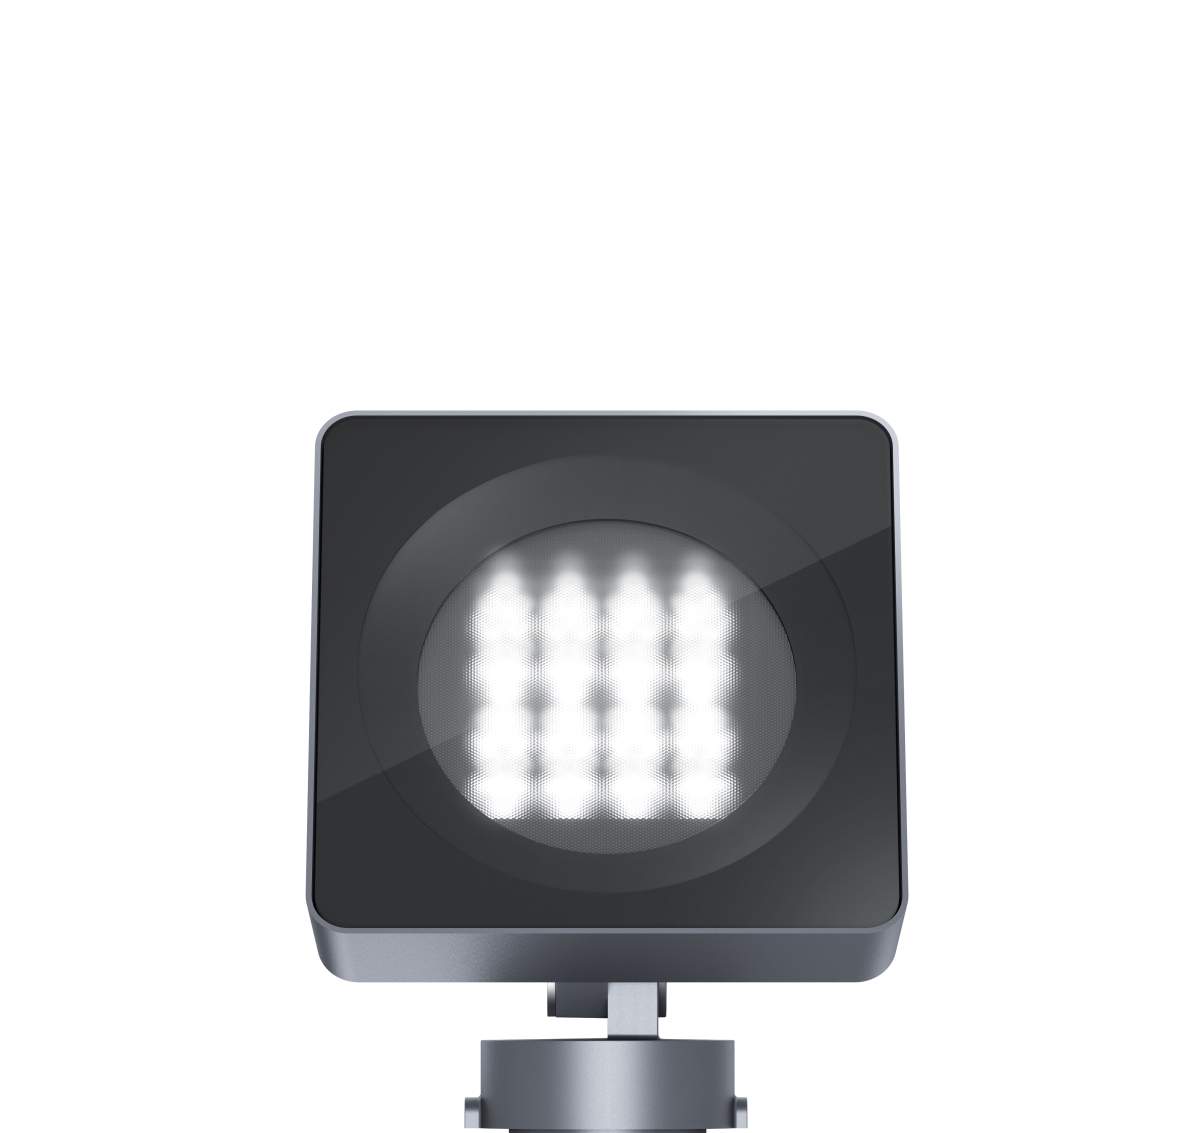 Lightscan IP65 Surf Mtd Floodlight With Mounting Plate Oval Flood Beam 96W LED 3000K ECG Graphit M